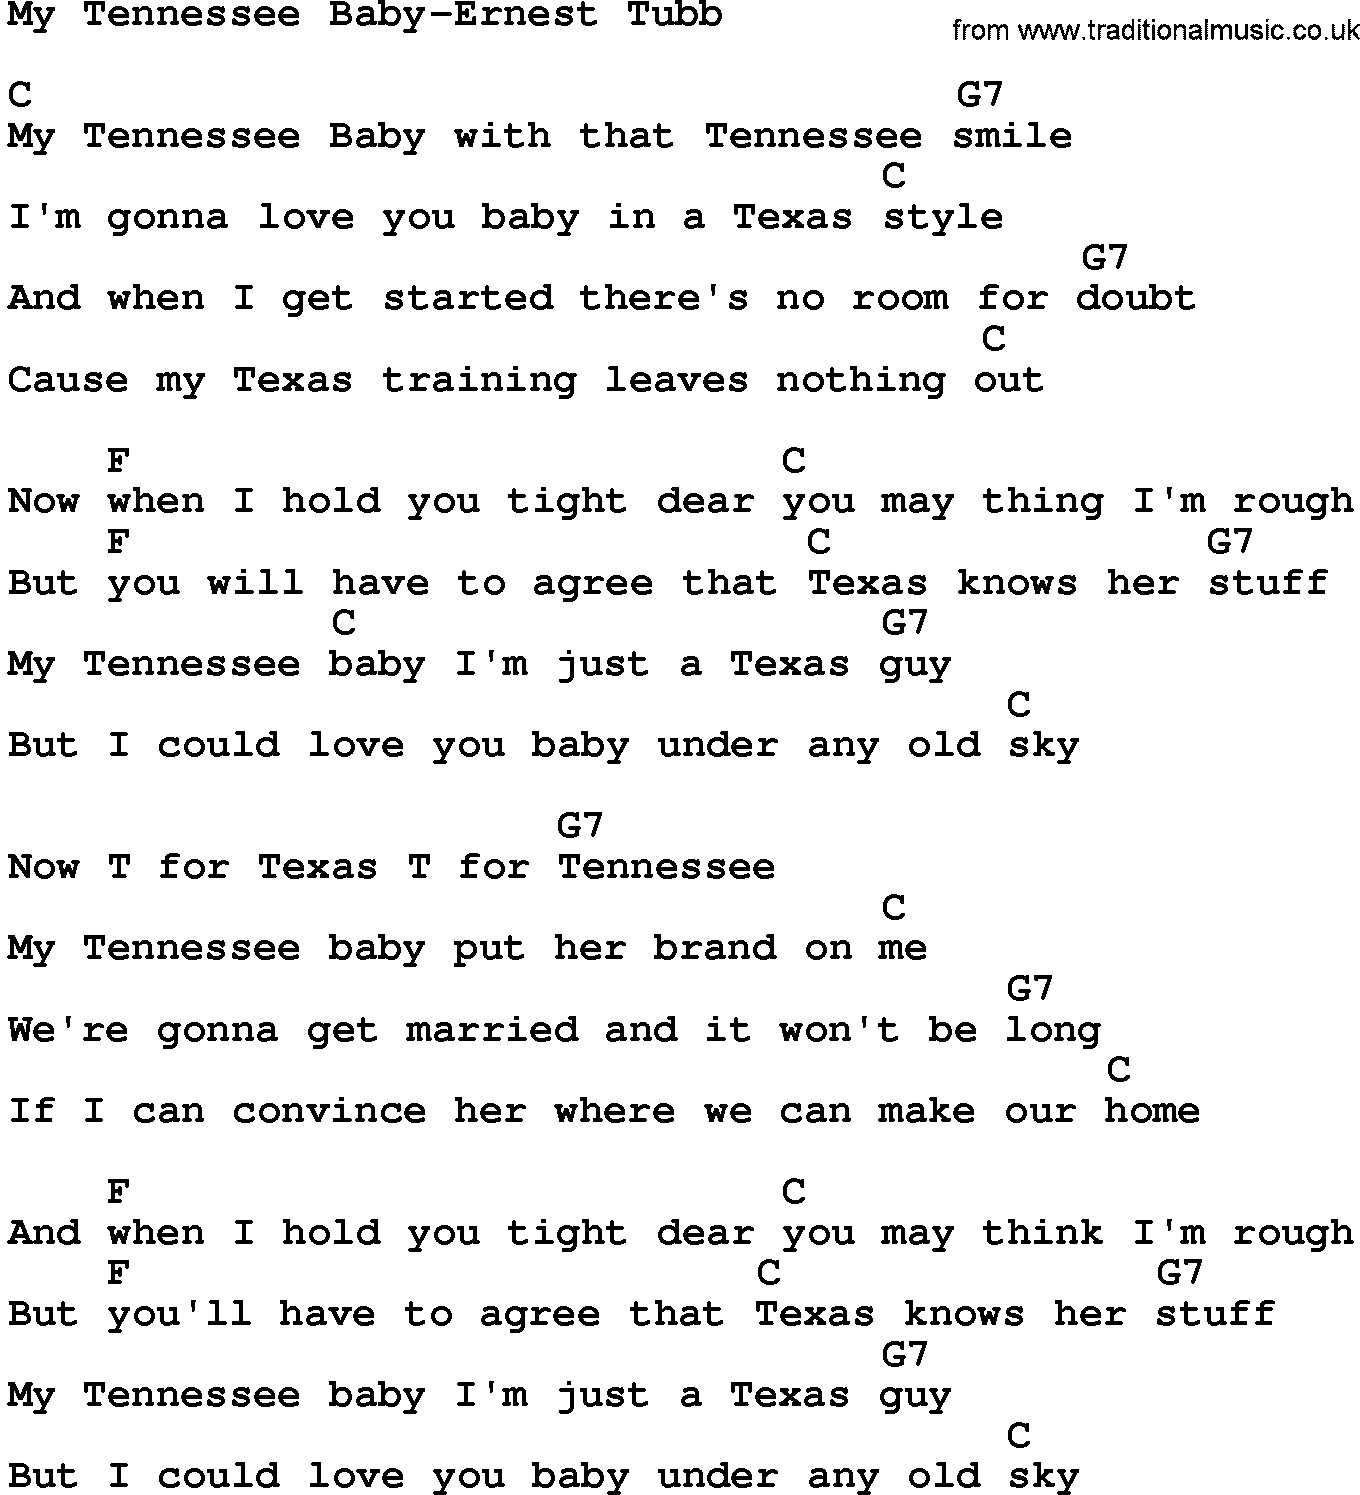 Country music song: My Tennessee Baby-Ernest Tubb lyrics and chords